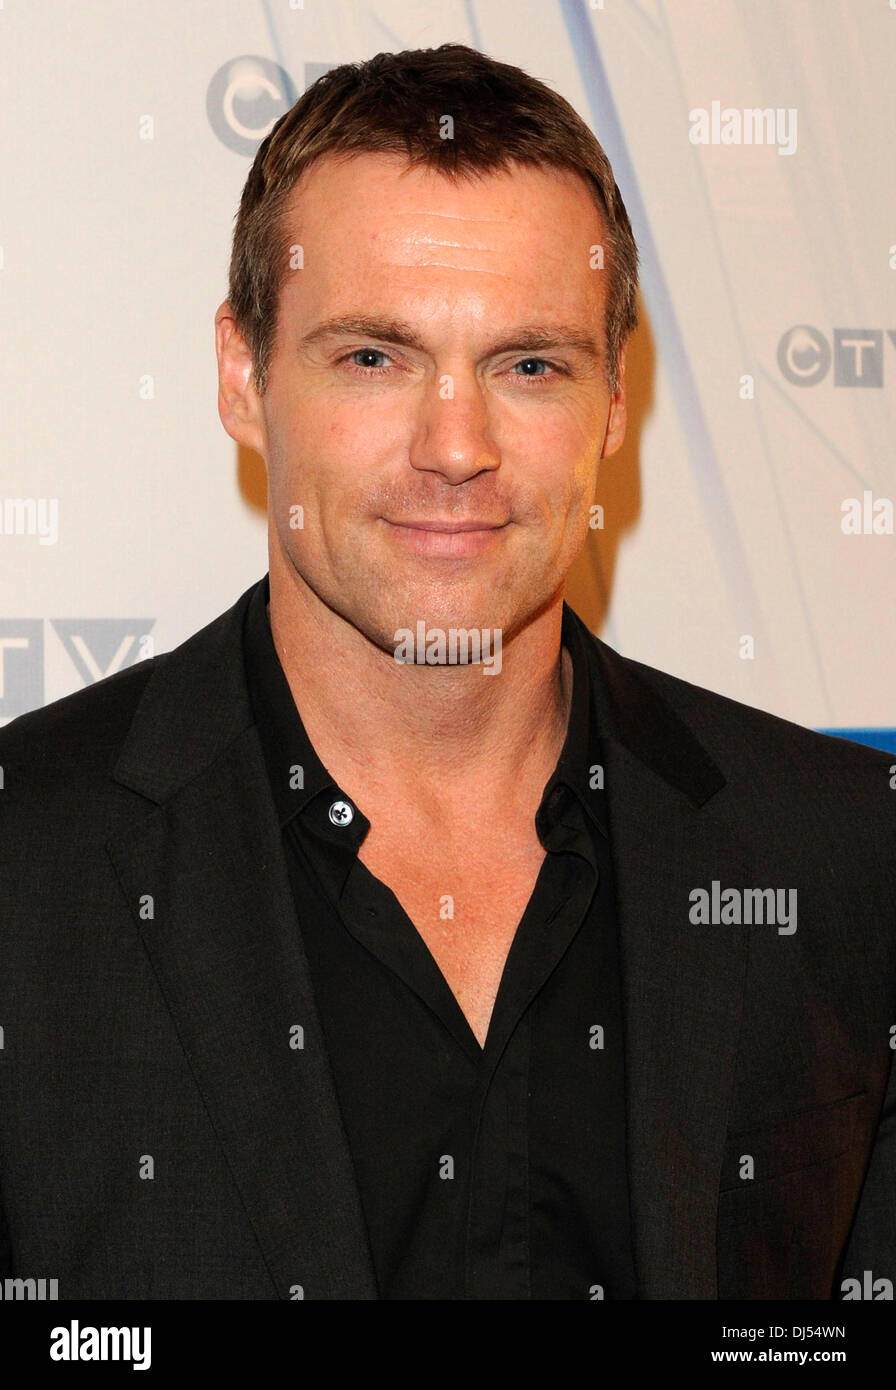 Michael Shanks CTV Upfront 2012 Presentation at The Sony Centre for the Performing Arts - Arrivals Toronto, Canada - 31.05.12 Stock Photo